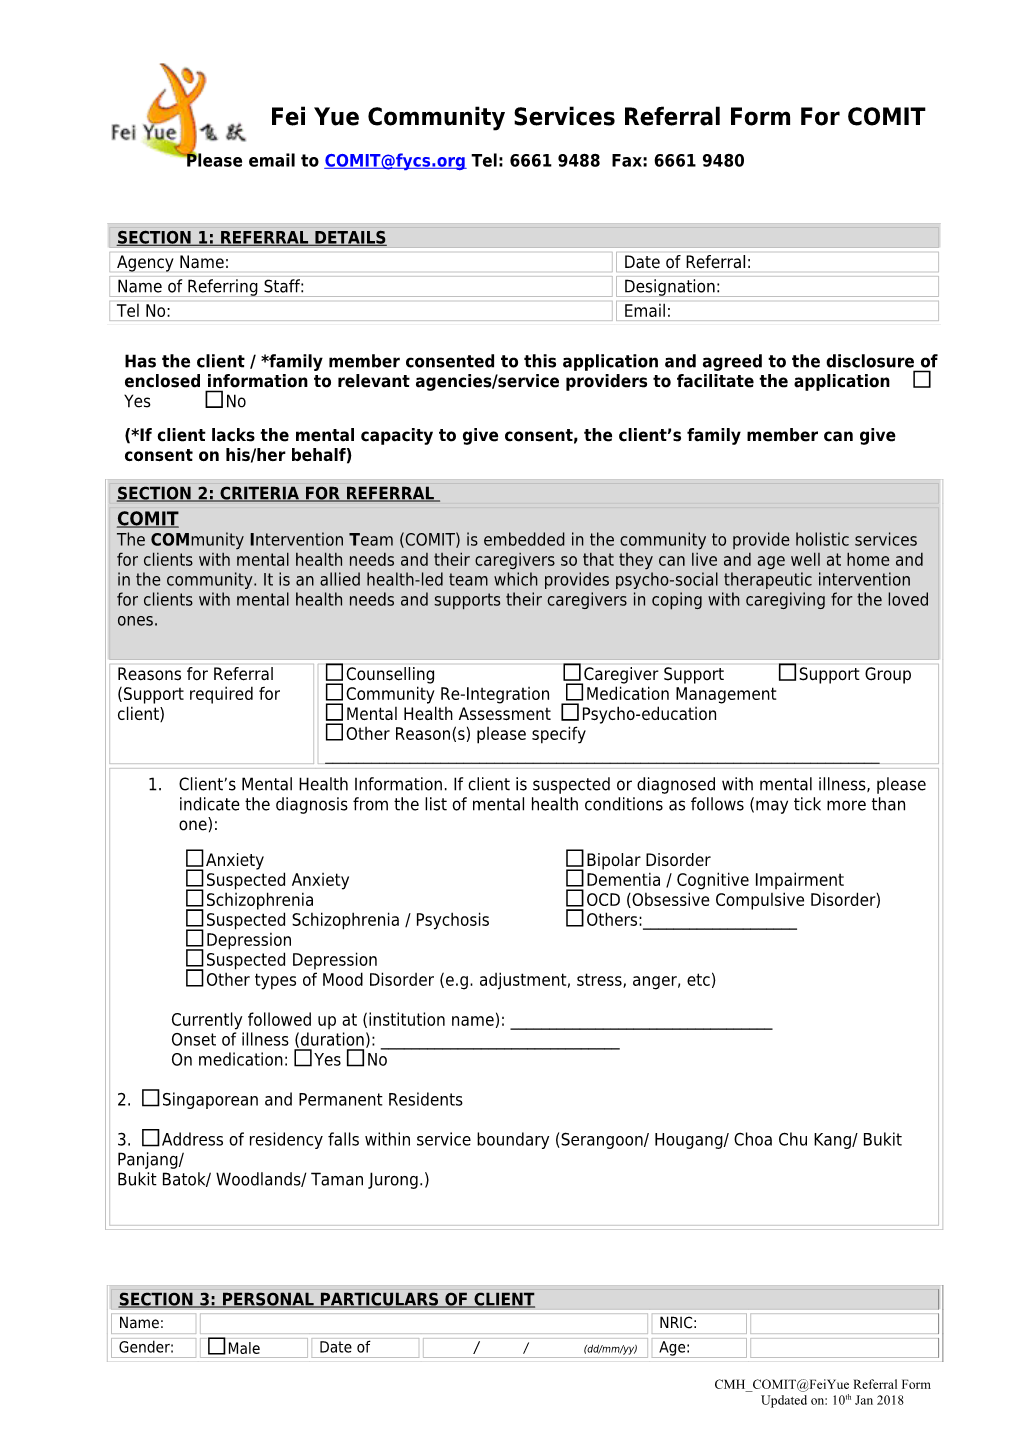 Fei Yue Community Services Referral Form for COMIT